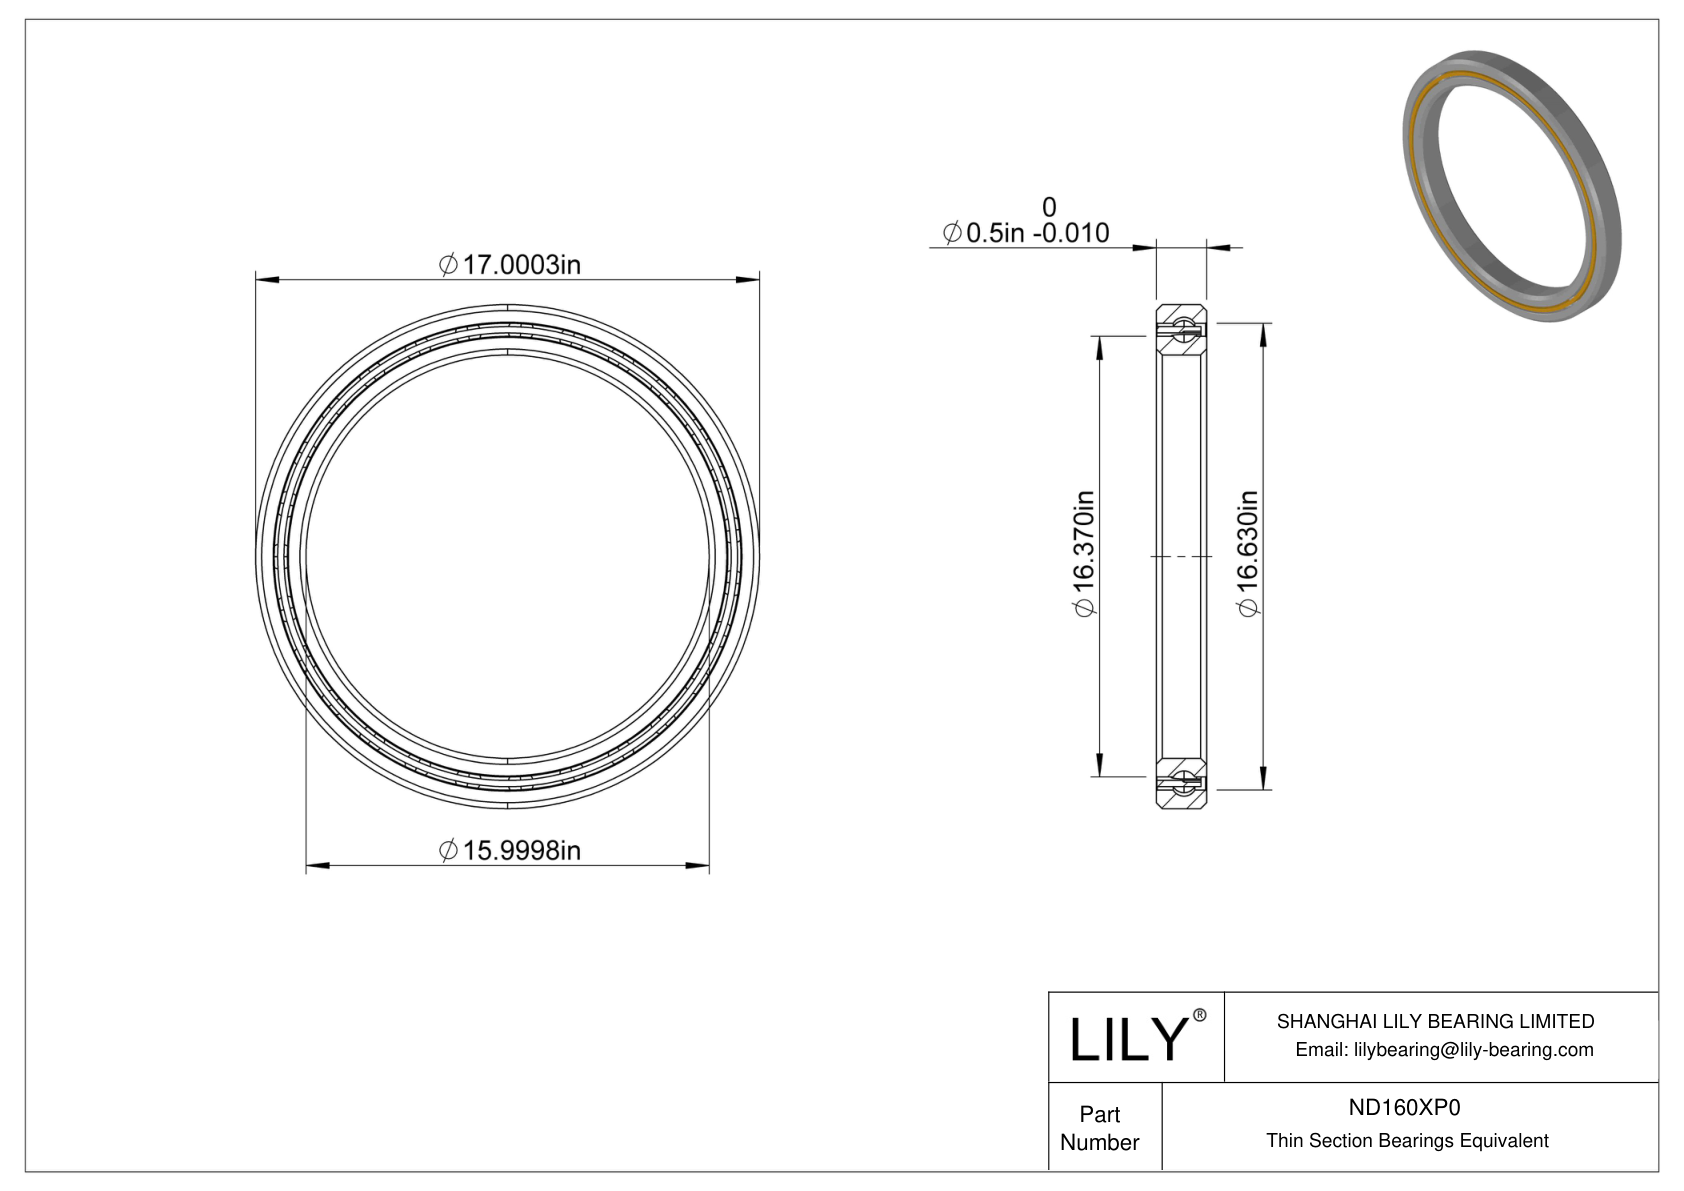 ND160XP0 Constant Section (CS) Bearings cad drawing